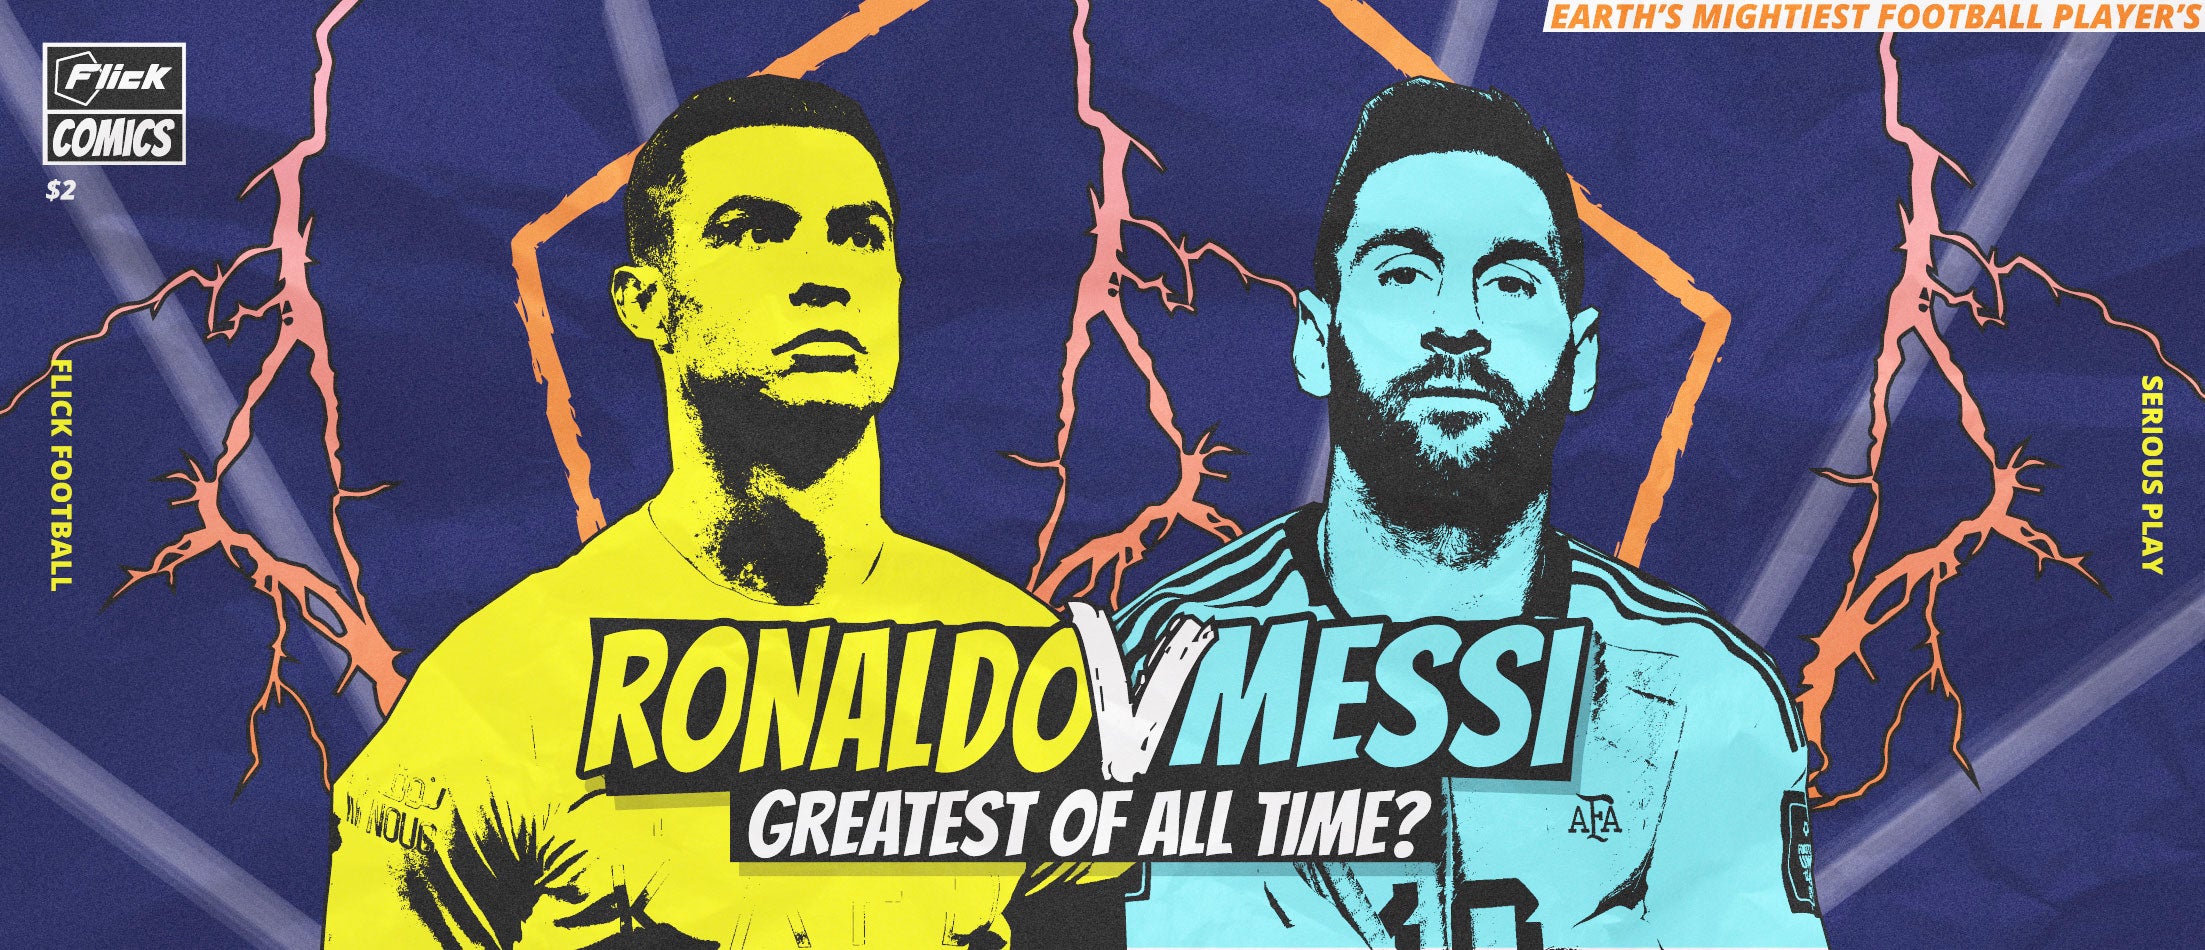 Lionel Messi vs Cristiano Ronaldo: Who is the greatest football player of all time?